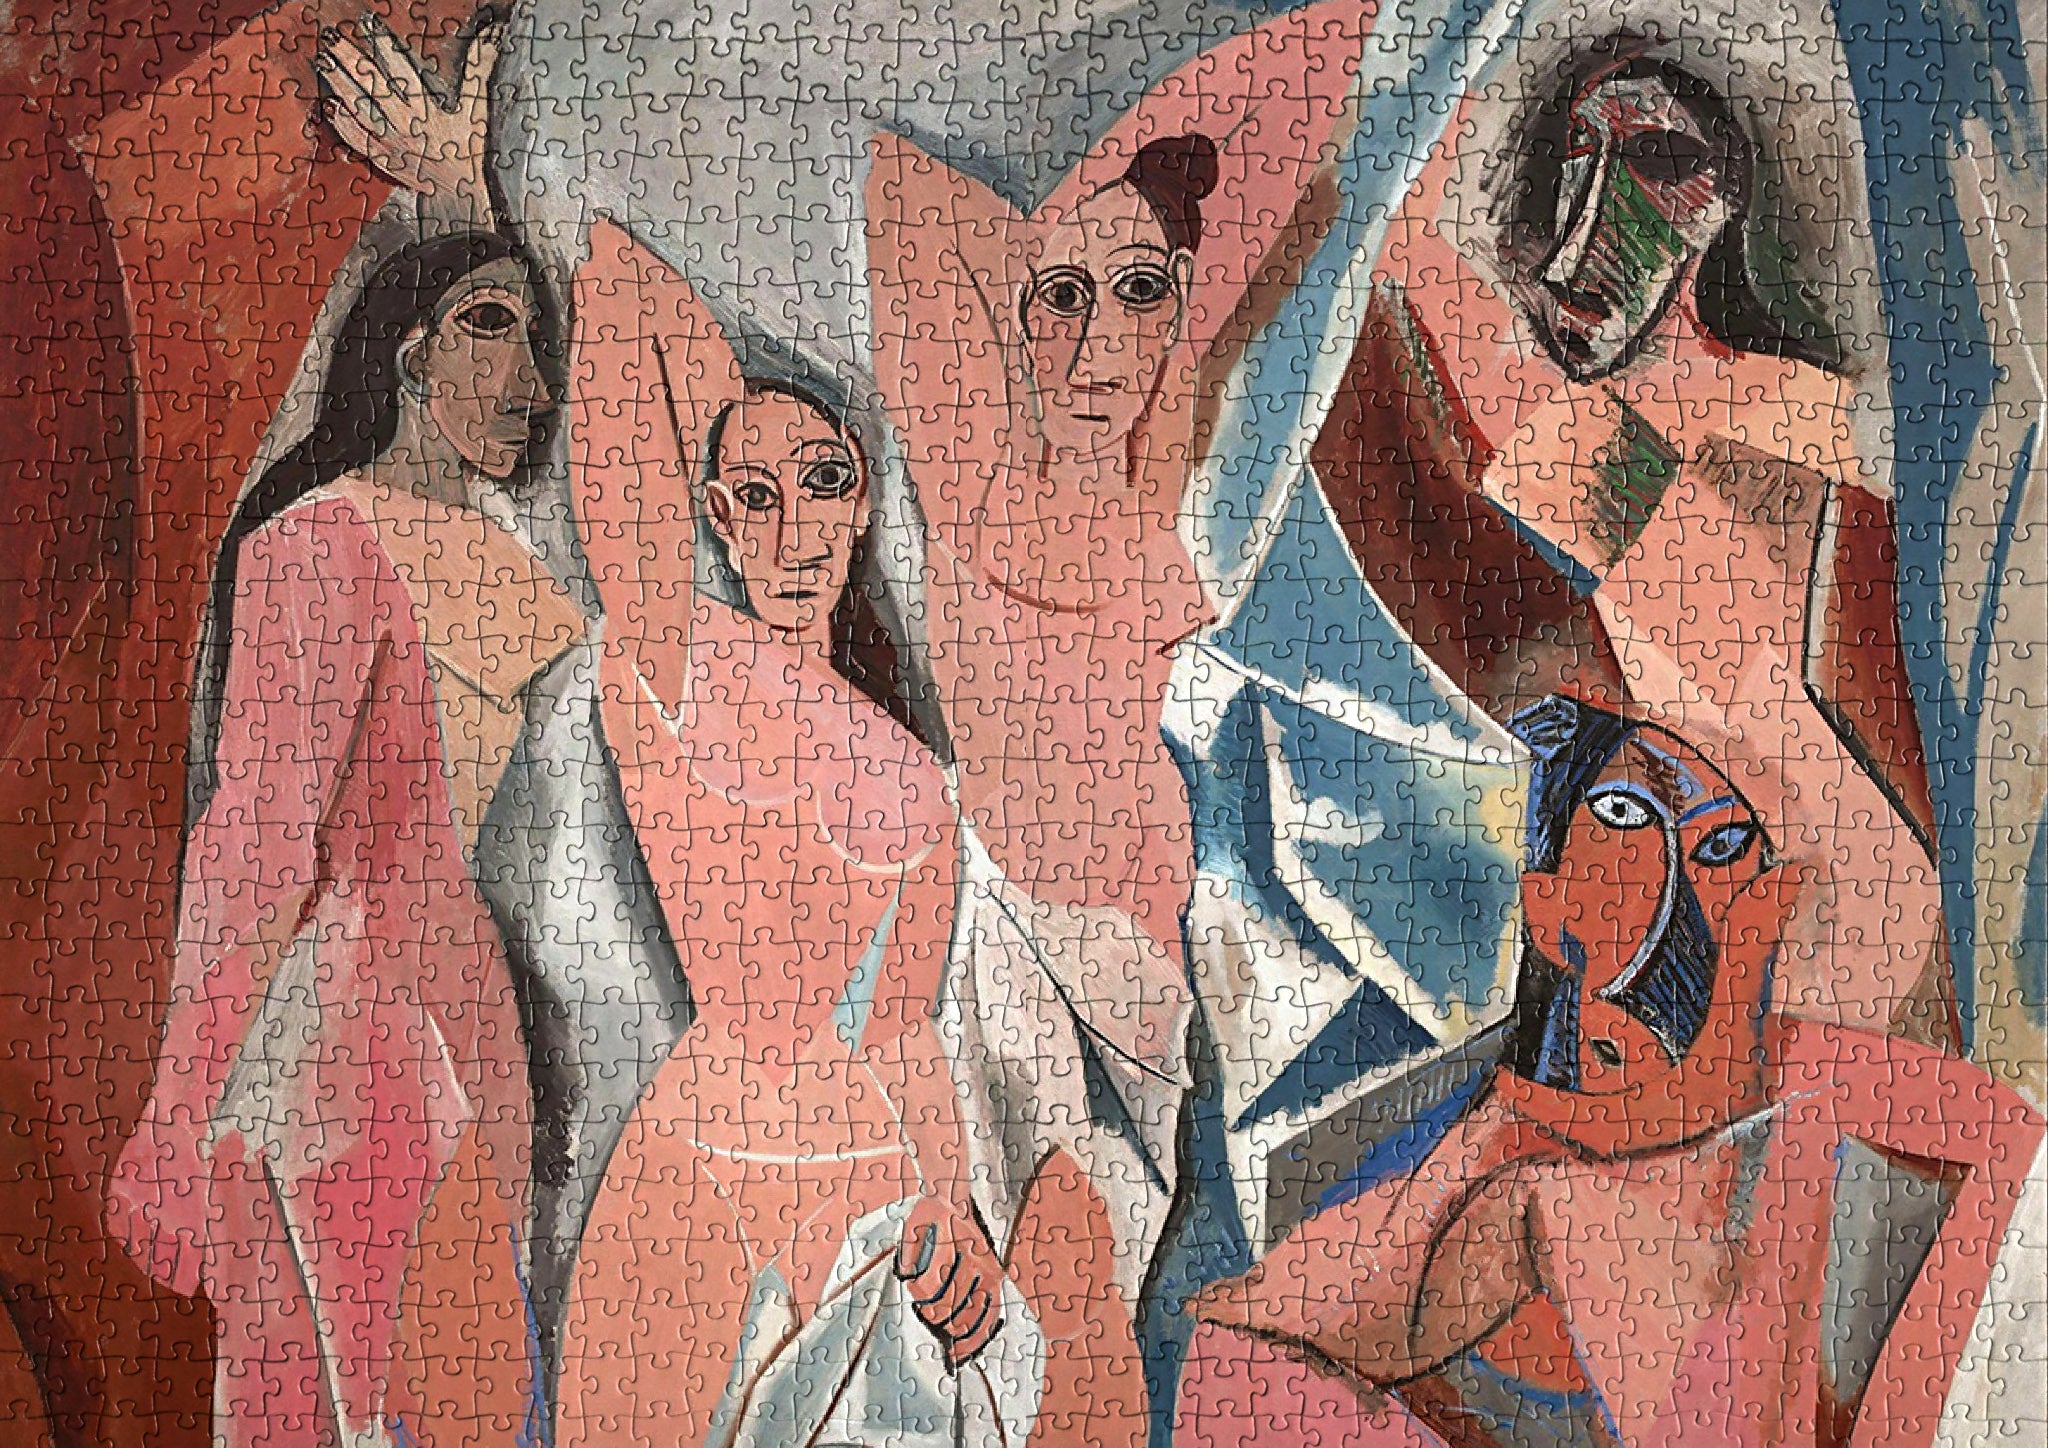 1000-piece jigsaw puzzle of Picasso's iconic 'The Young Ladies of Avignon' painting.